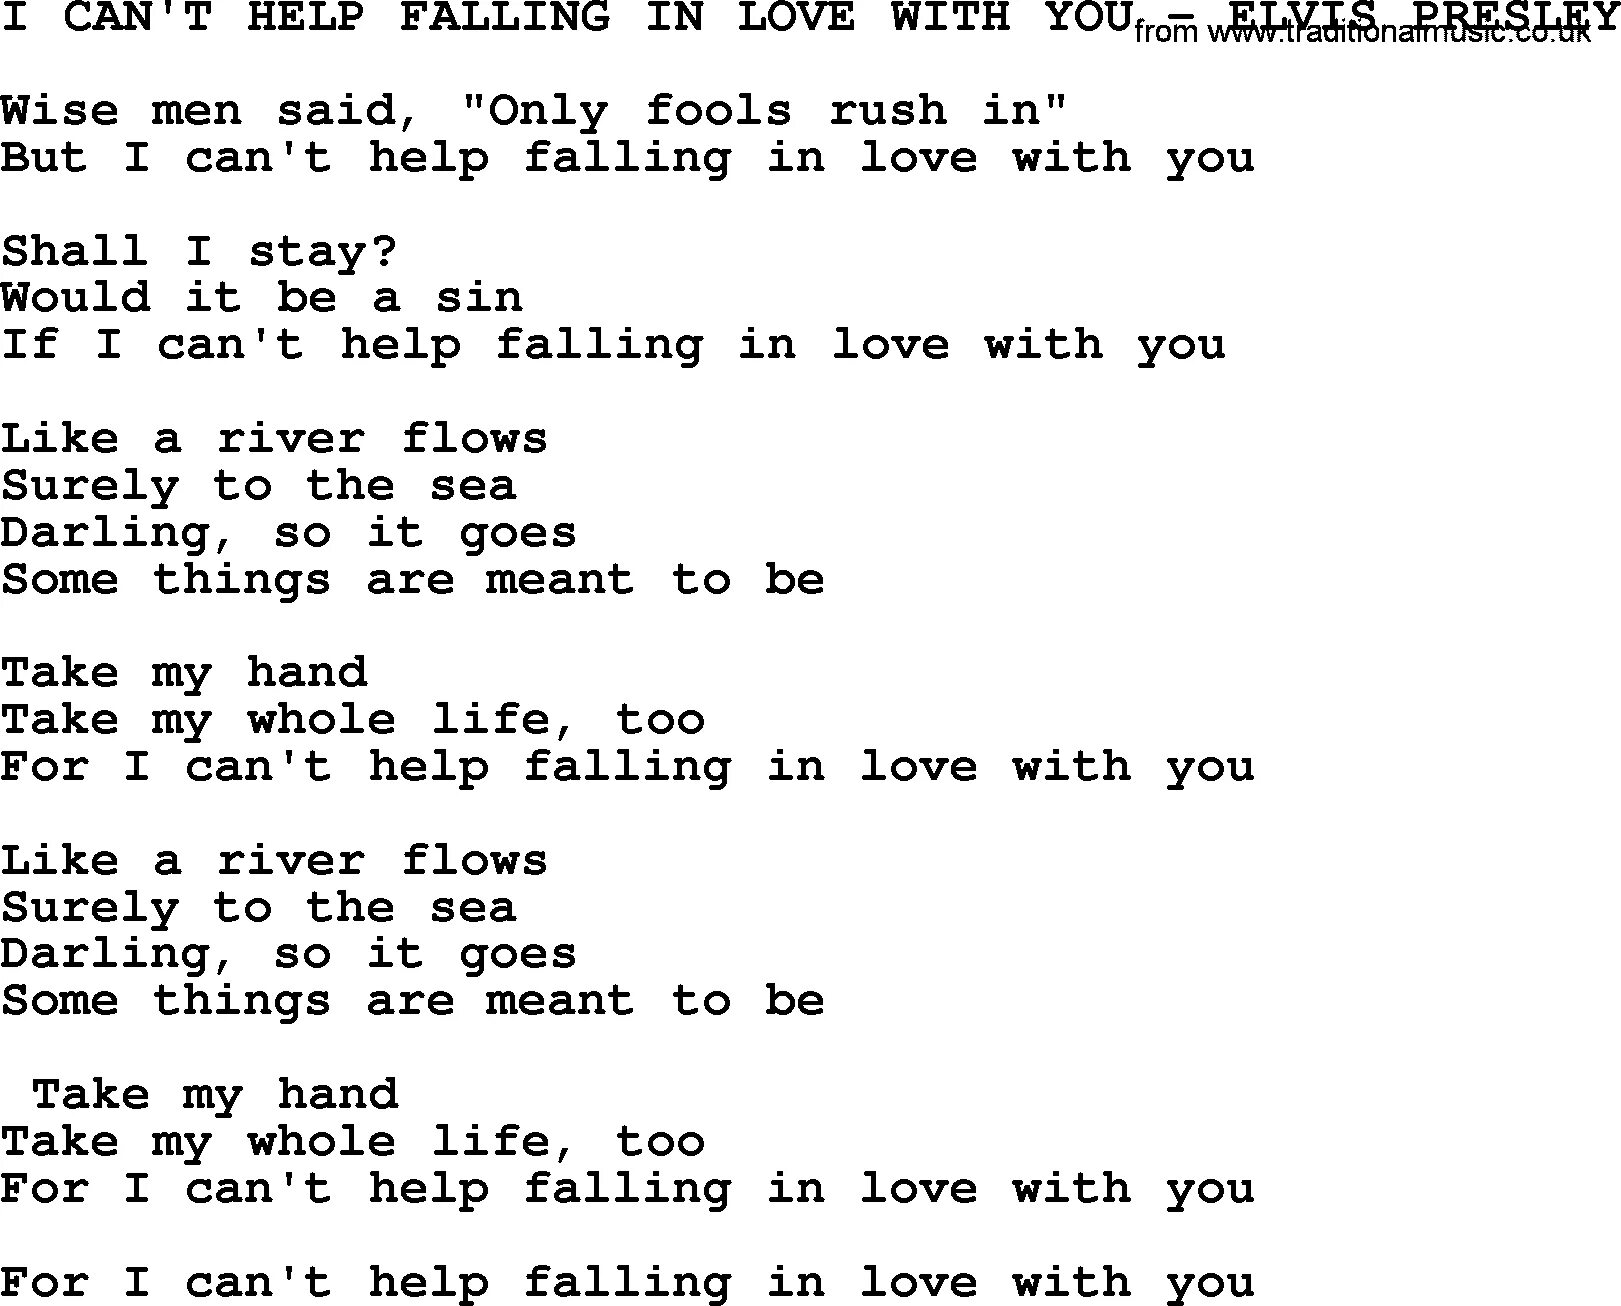 Can’t help Falling in Love Элвис Пресли. Elvis Presley cant help Falling in Love Lyrics. Can't help Falling in Love with you Элвис Пресли. Falling in Love with you текст. I could say i should say